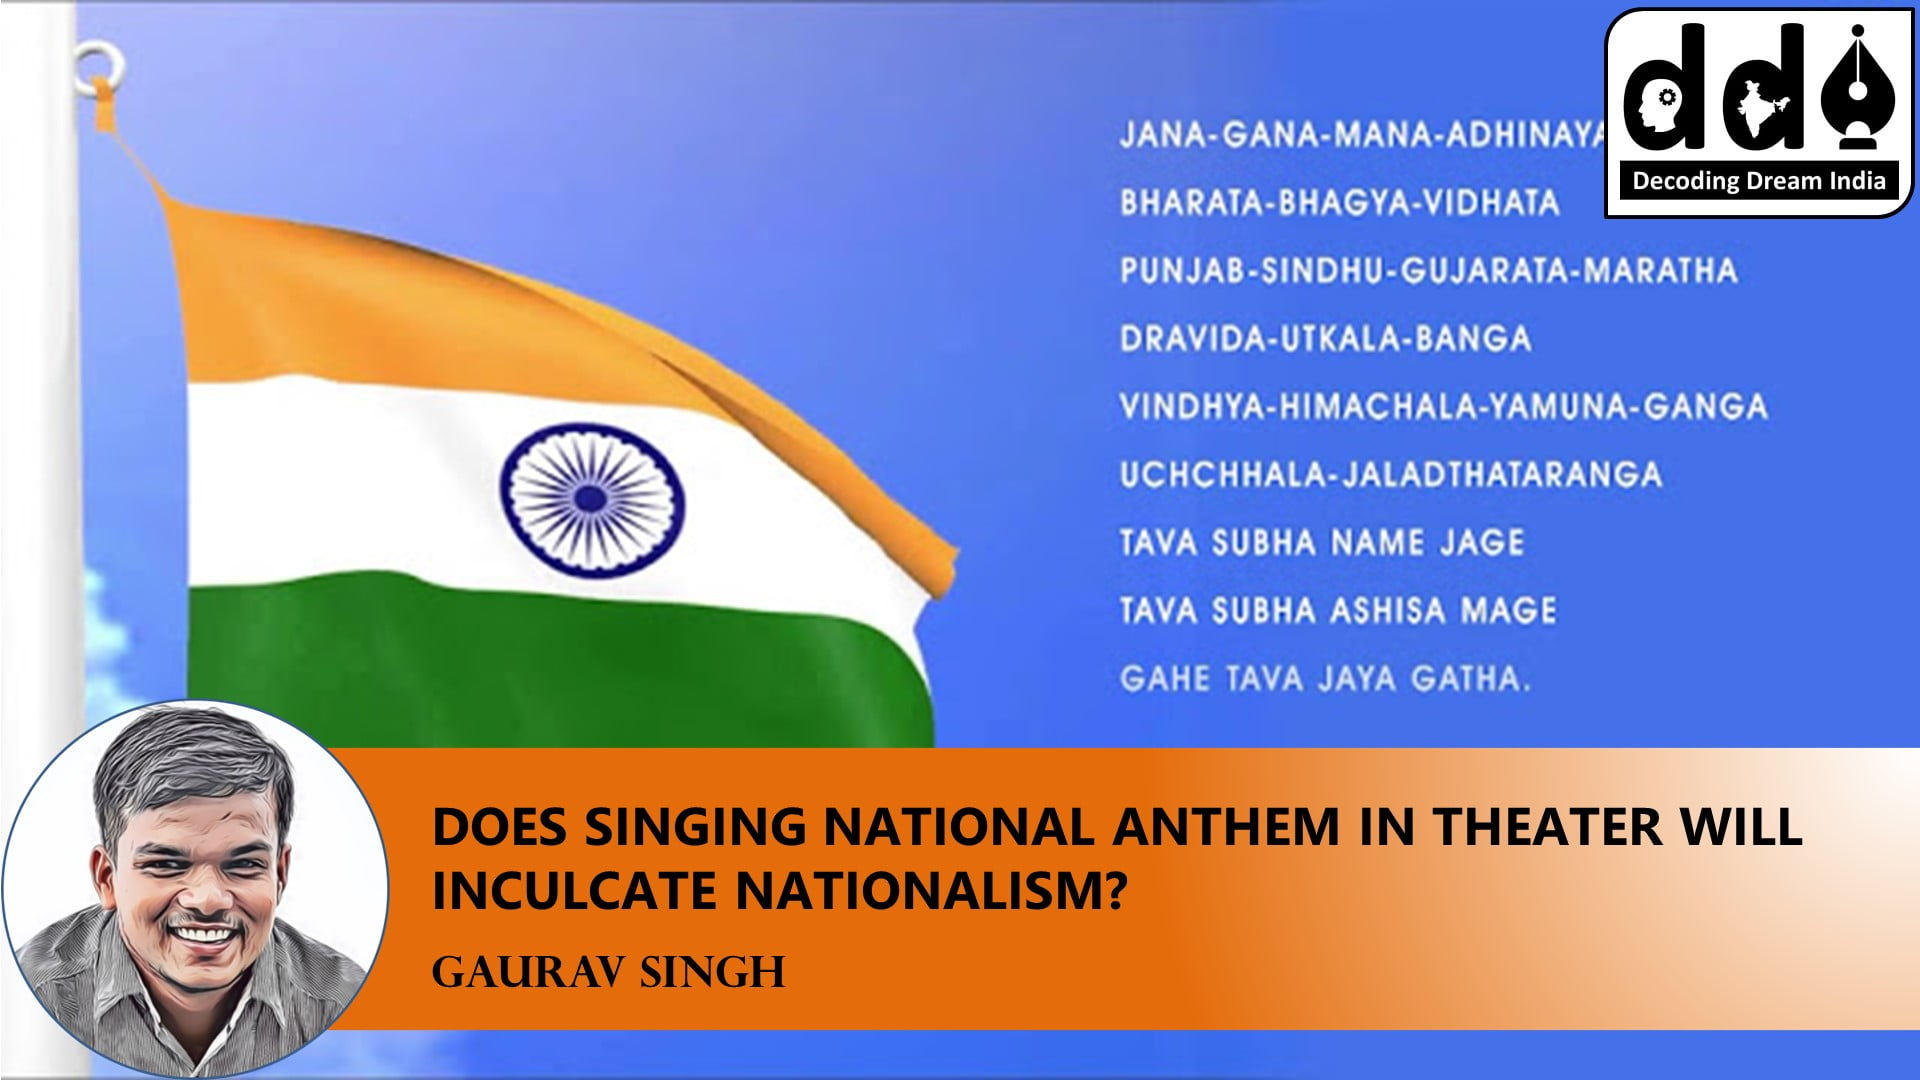 National anthem in theater